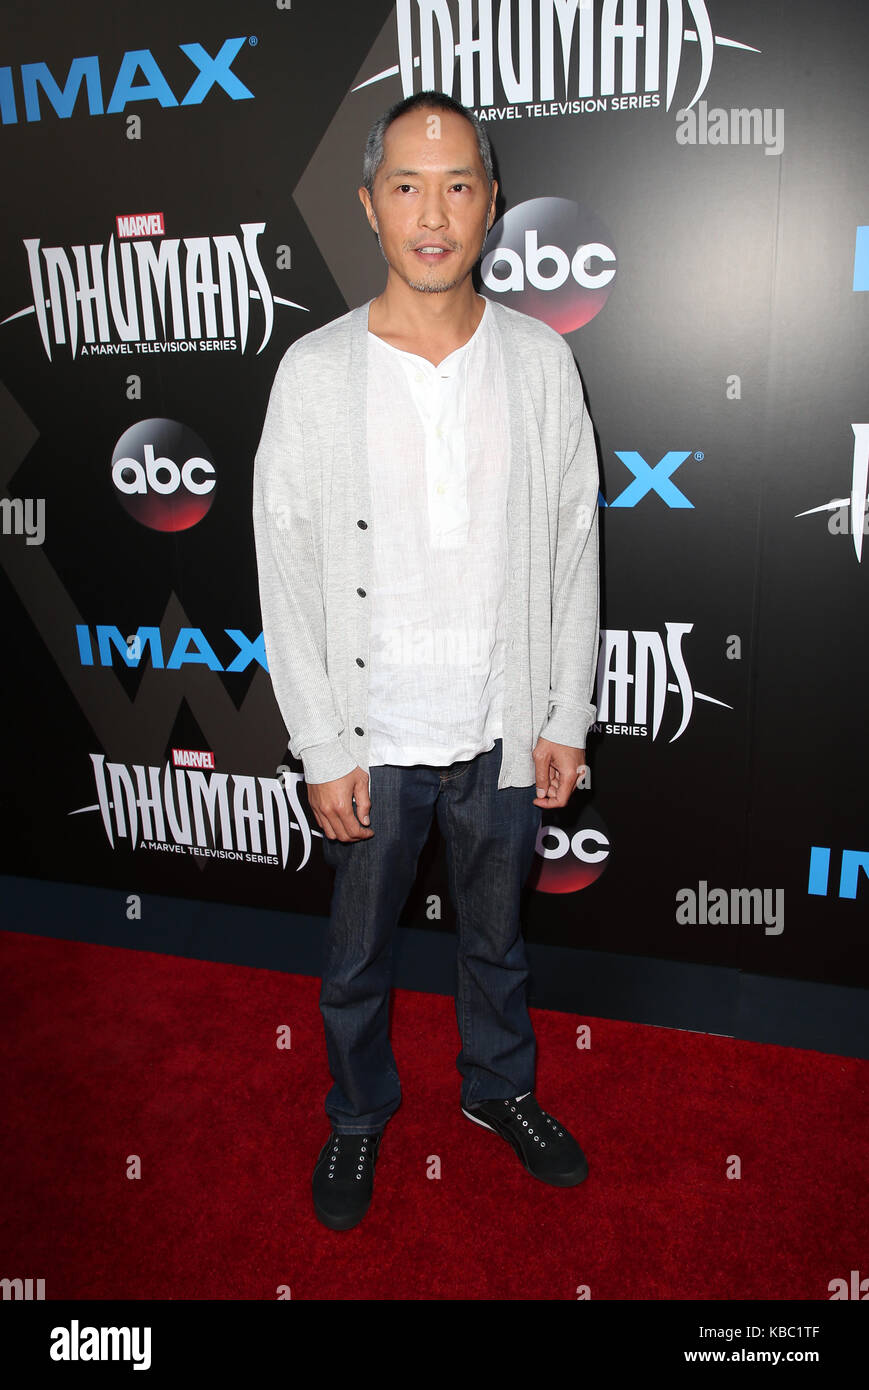 Premiere of ABC and Marvel's 'Inhumans' - Arrivals  Featuring: Ken Leung Where: Universal City, California, United States When: 28 Aug 2017 Credit: FayesVision/WENN.com Stock Photo